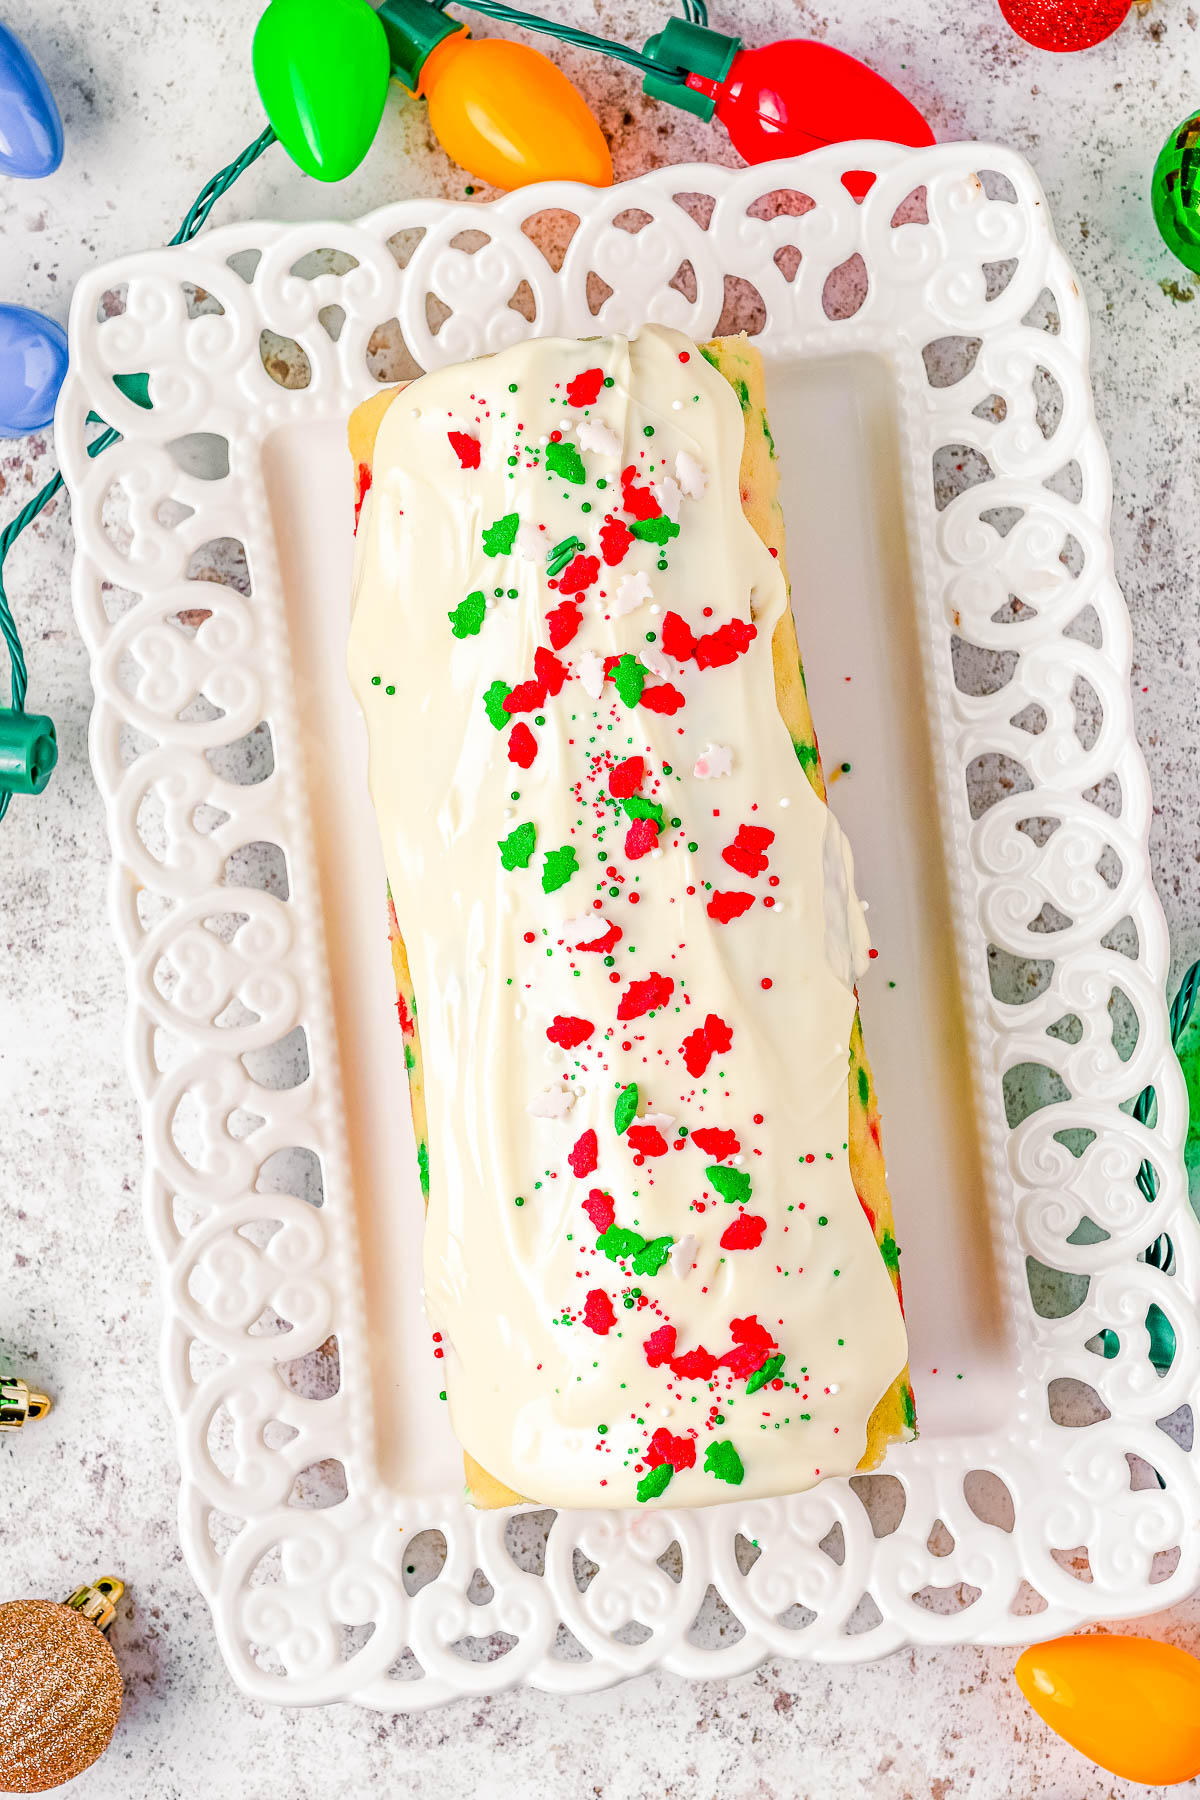 Christmas Cake Roll - Celebrate the holiday season with this scrumptious vanilla cake that's filled to the brim with a tangy-sweet cream cheese filling and topped with melted white chocolate! Plenty of red and green sprinkles add the PERFECT festive flair to this stunning holiday dessert recipe that's perfect for all your holiday entertaining needs and parties! Easy enough for novice bakers!